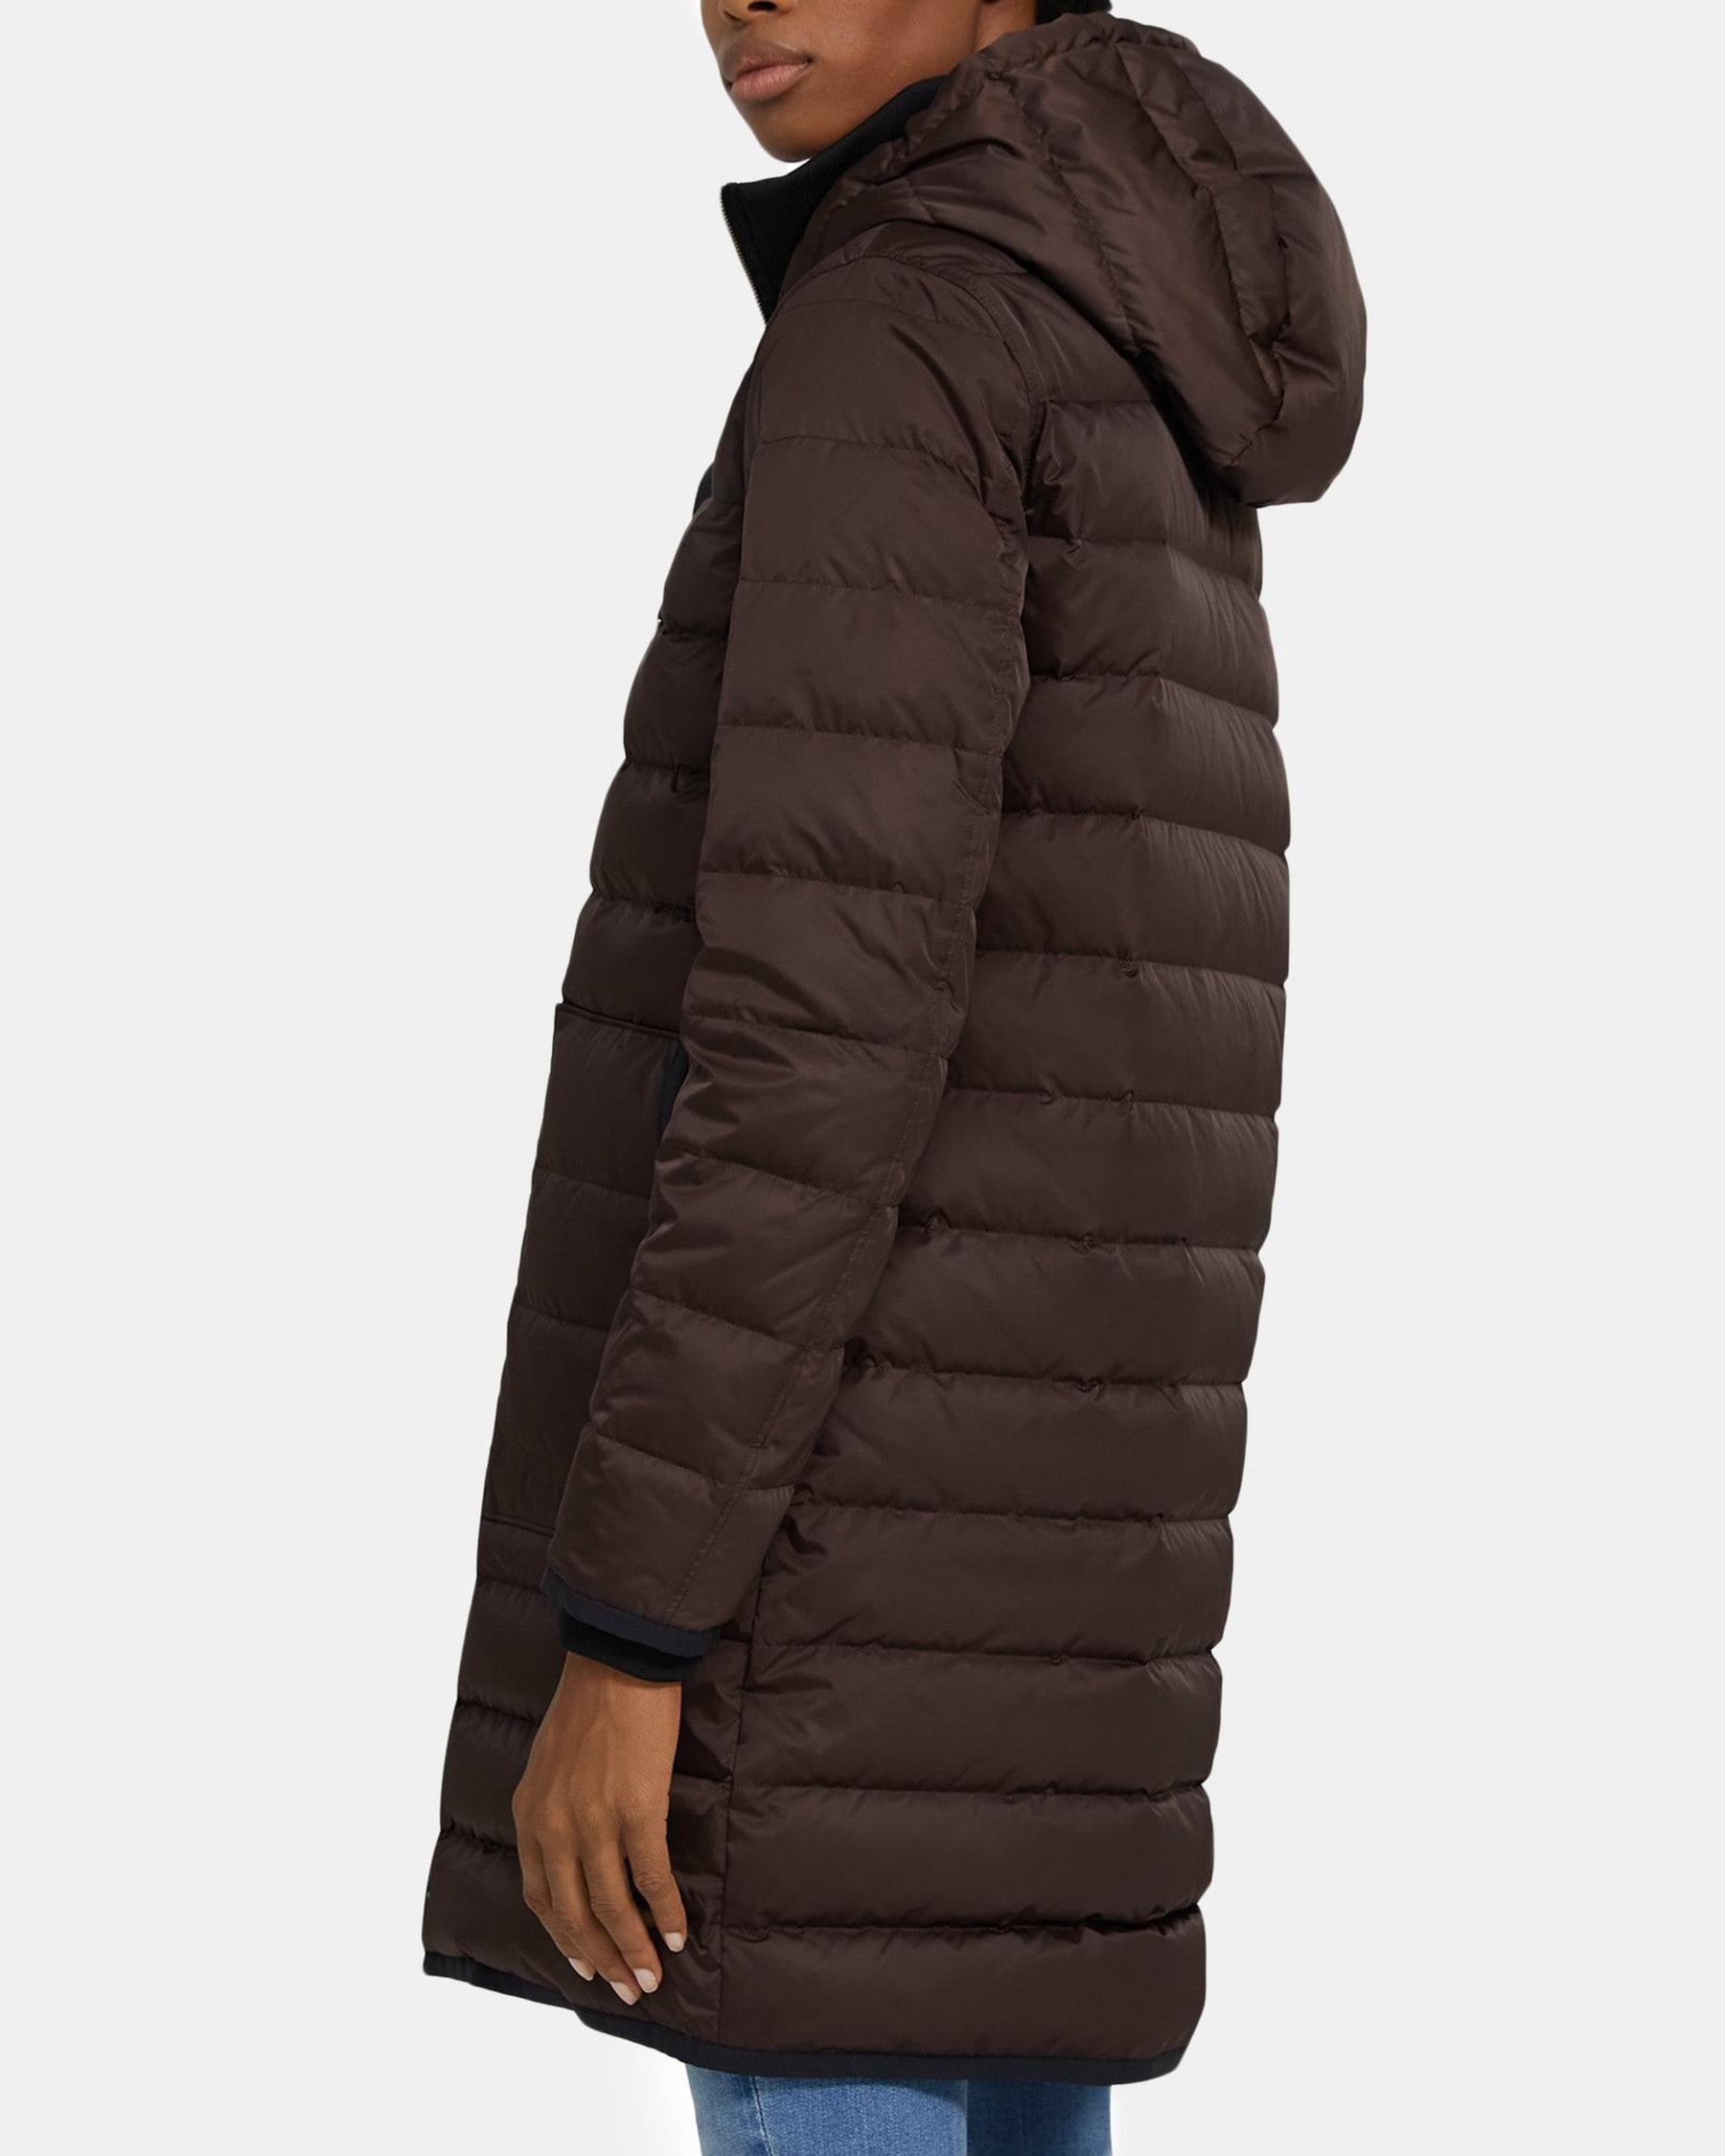 LT QUILTED JKT H | Theory Outlet